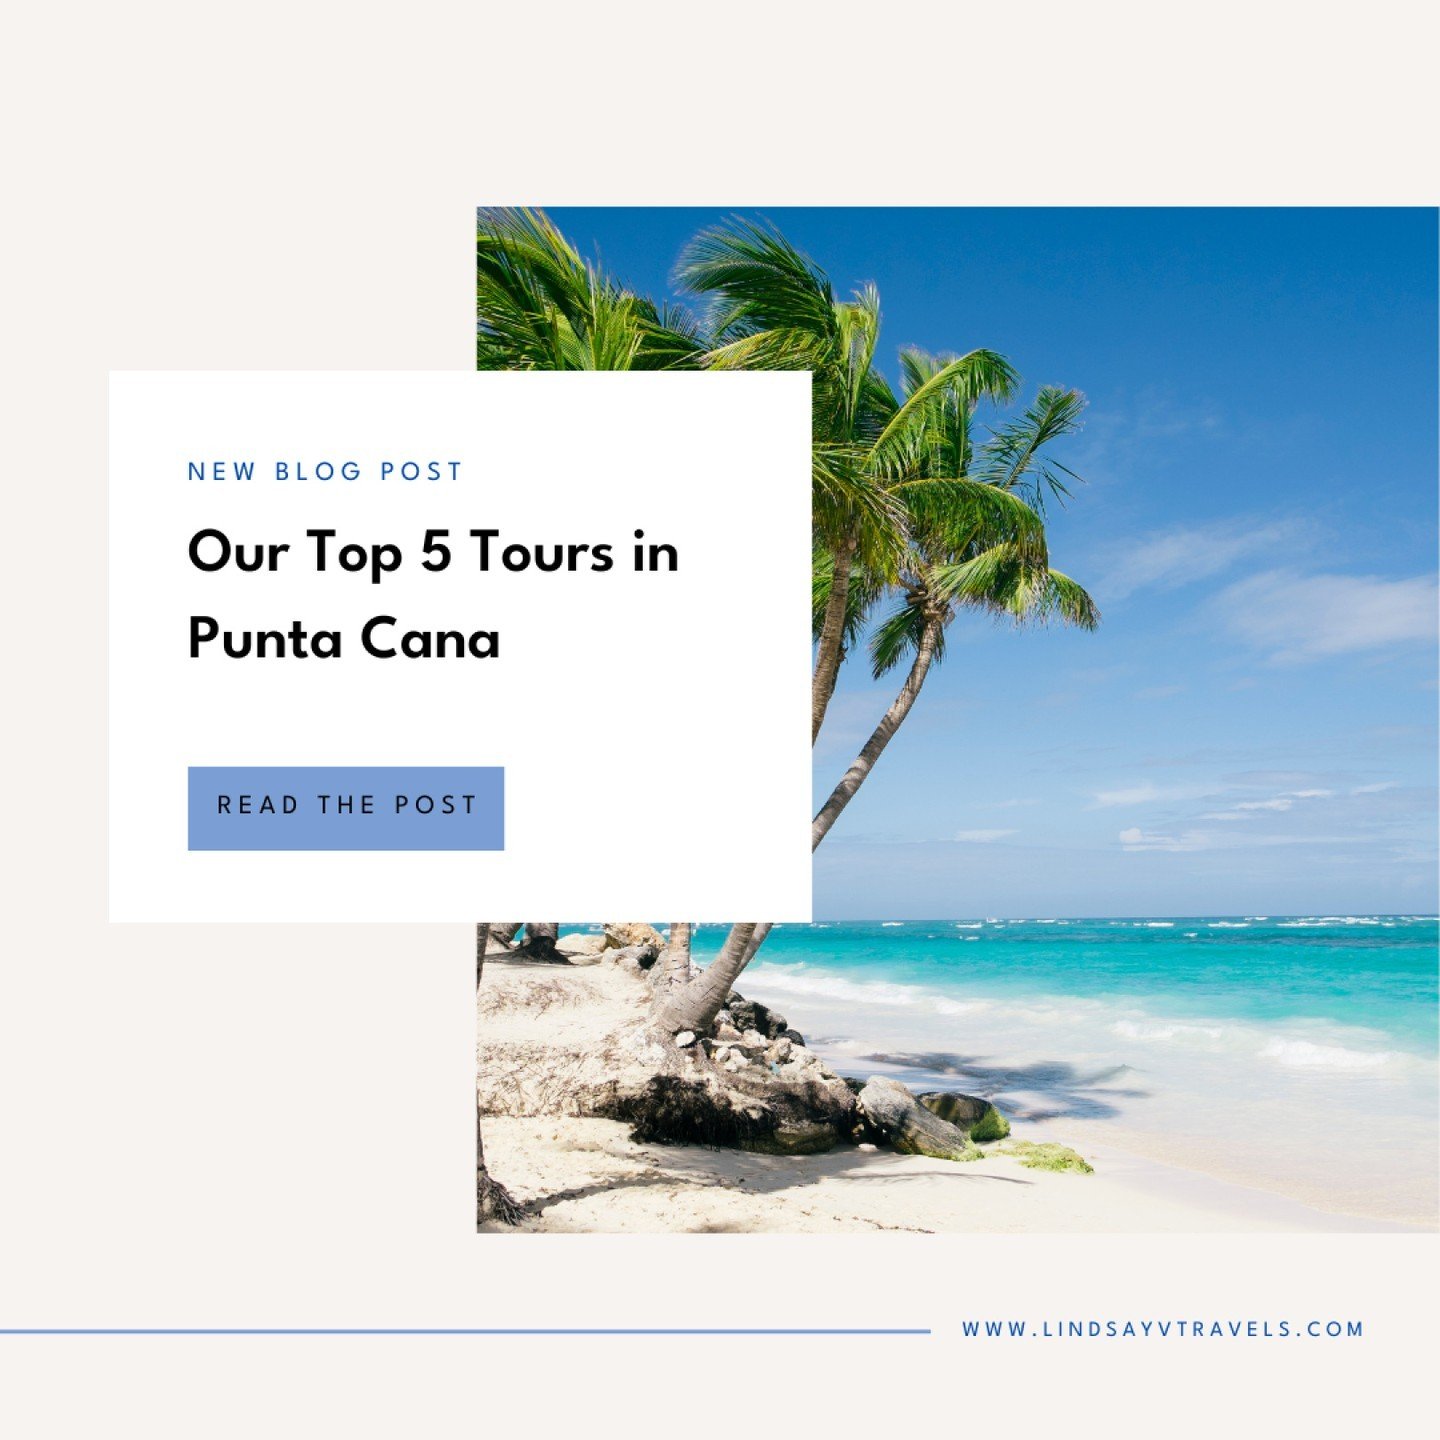 🌴☀️ Discover Punta Cana with Our Top 5 Tours! 🌴🌊

Ready to explore paradise? We've rounded up the ultimate list of must-do tours in Punta Cana that will make your trip unforgettable! 🇩🇴 From pristine beaches to thrilling adventures, here are our